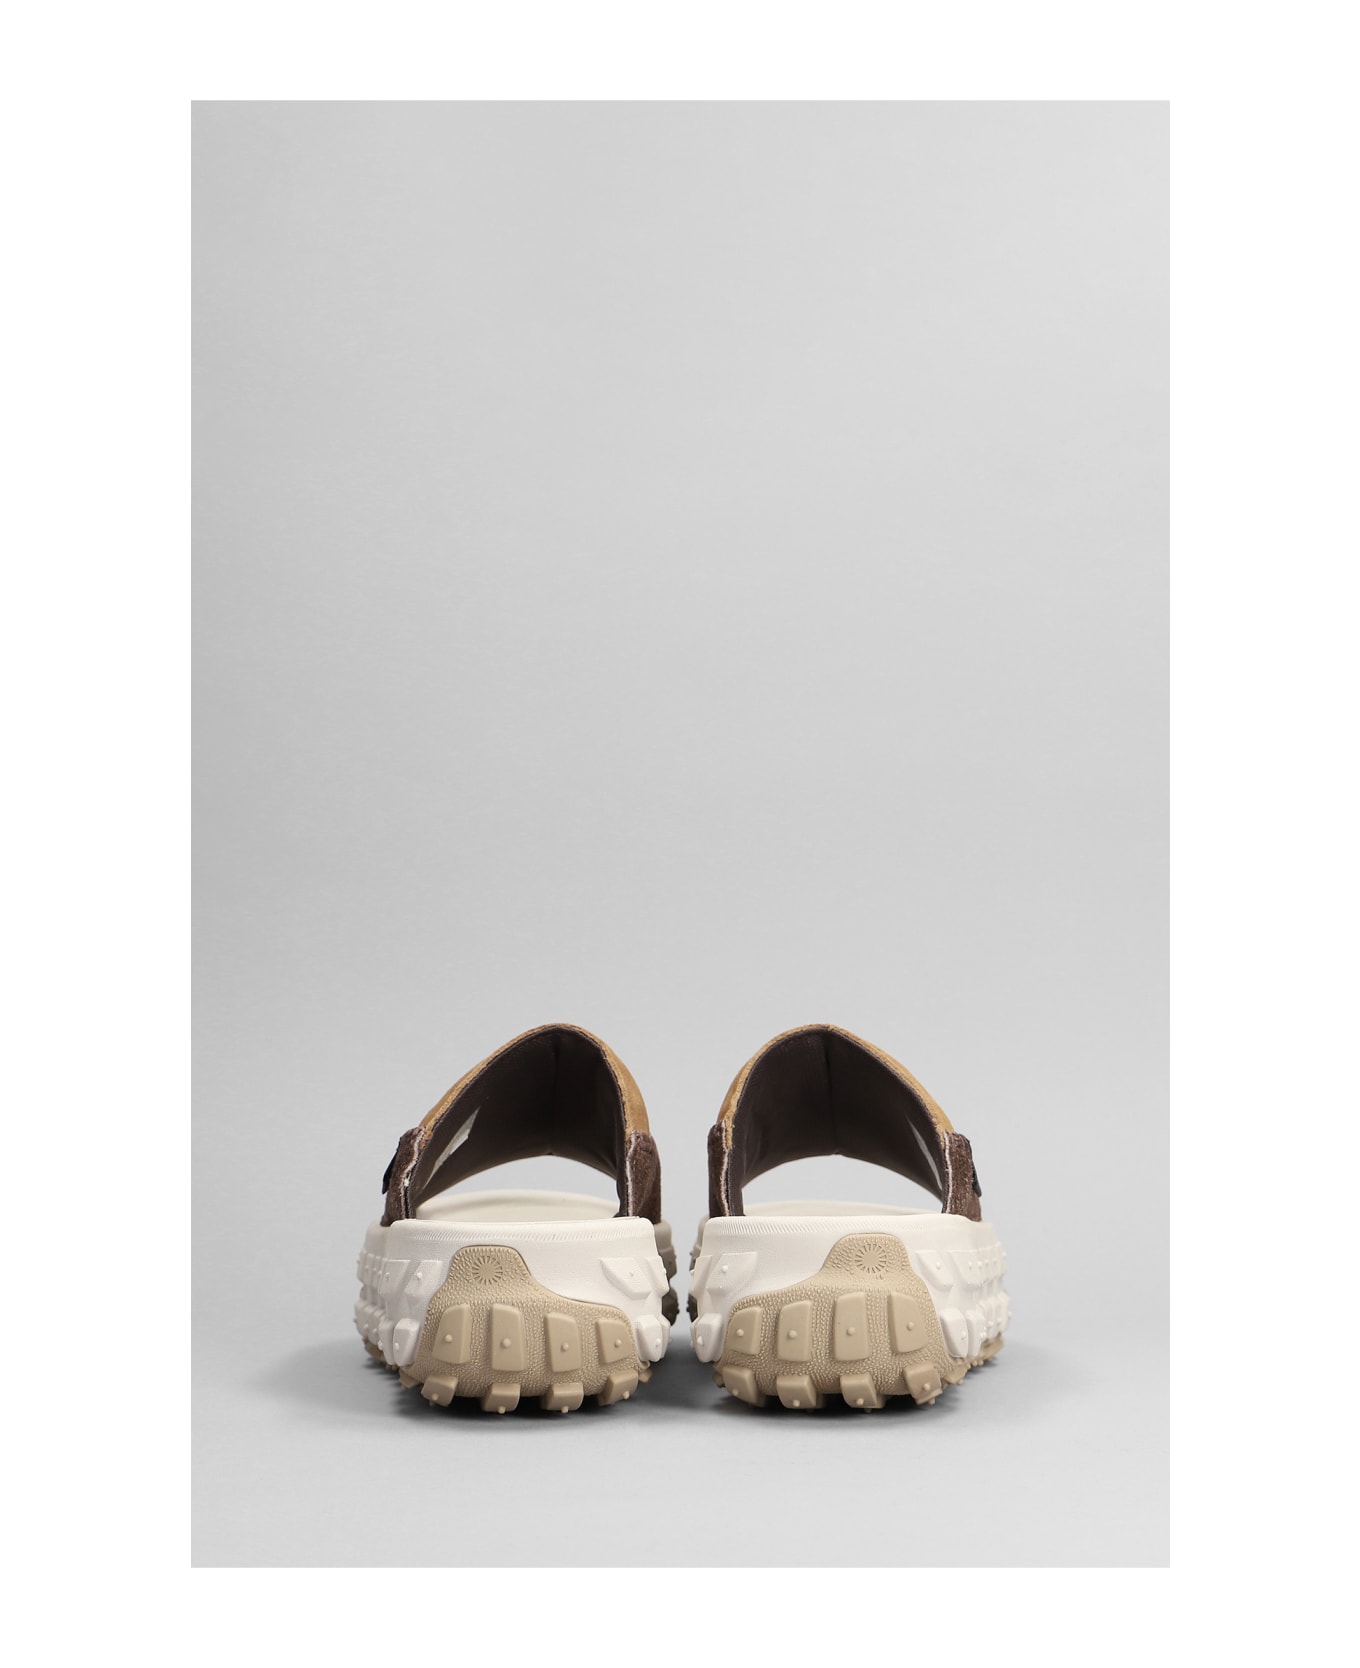 UGG Venture Daze Slipper-mule In Leather Color Suede - leather color サンダル